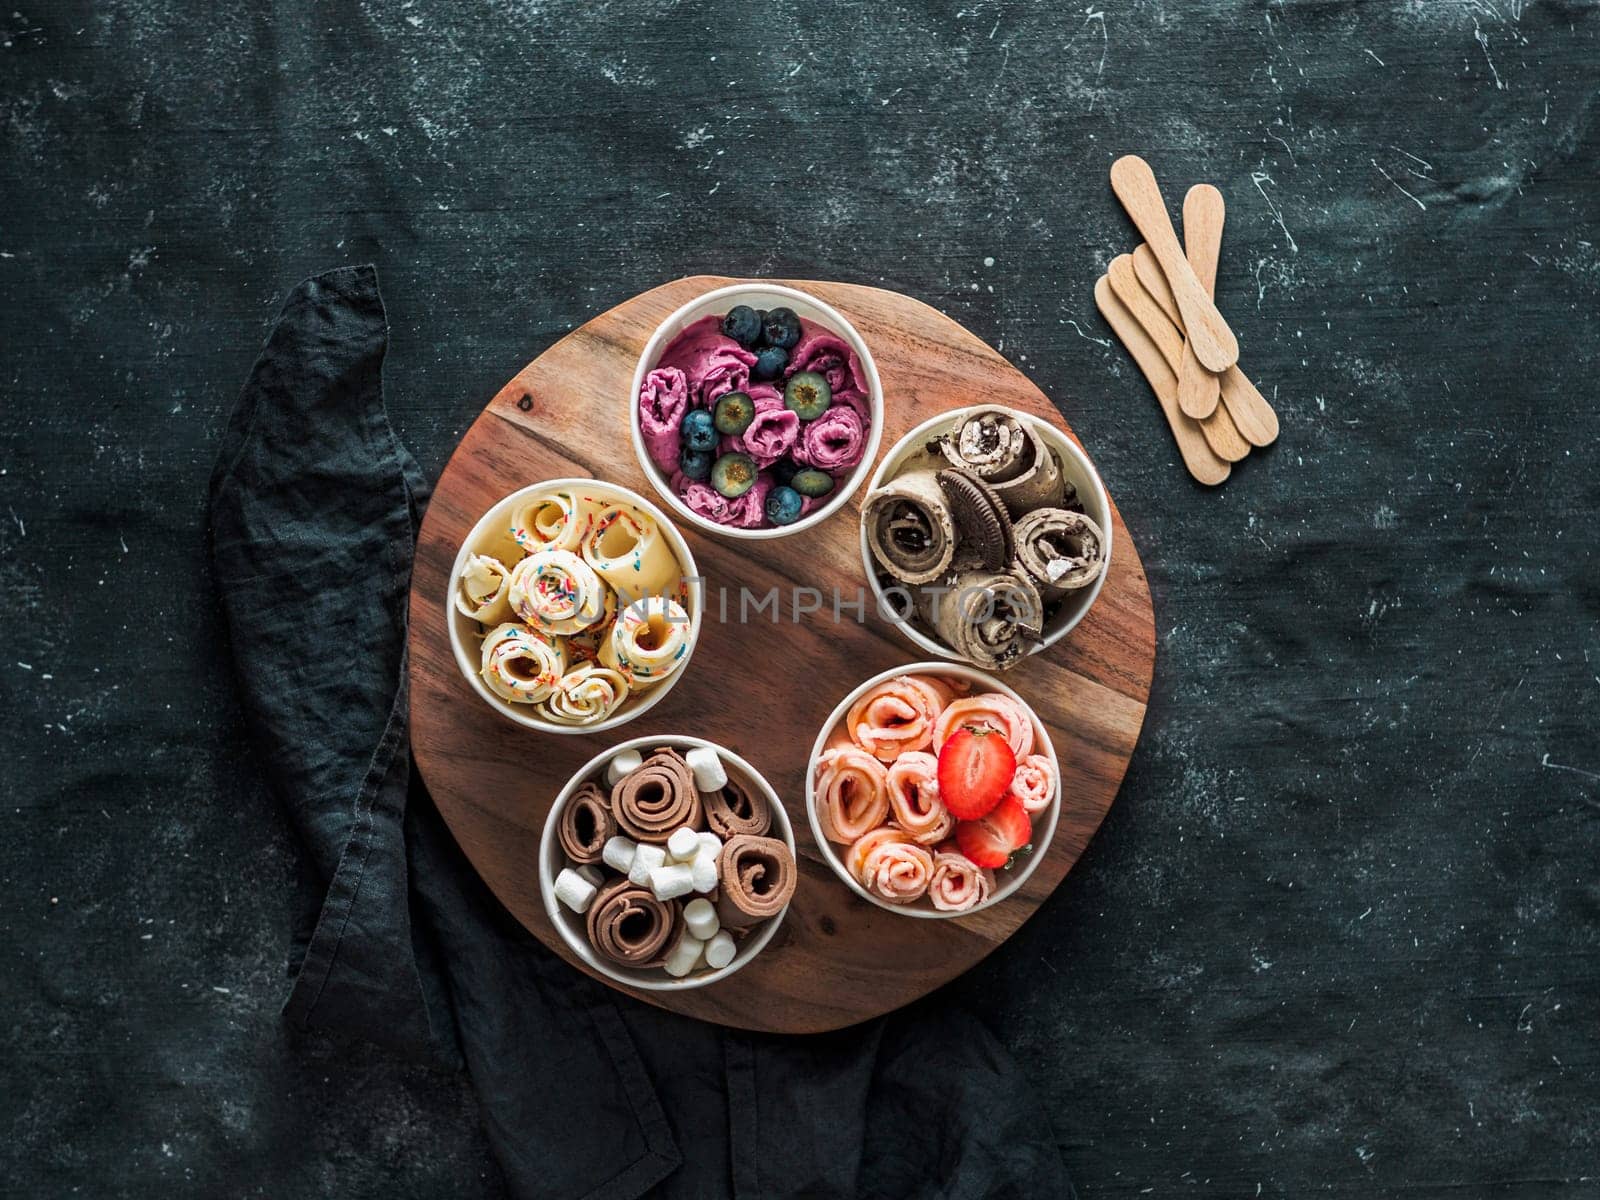 Rolled ice cream in cone cups on rustic round wooden tray on dark background. Different iced rolls top view or flat lay. Thai style rolled ice cream